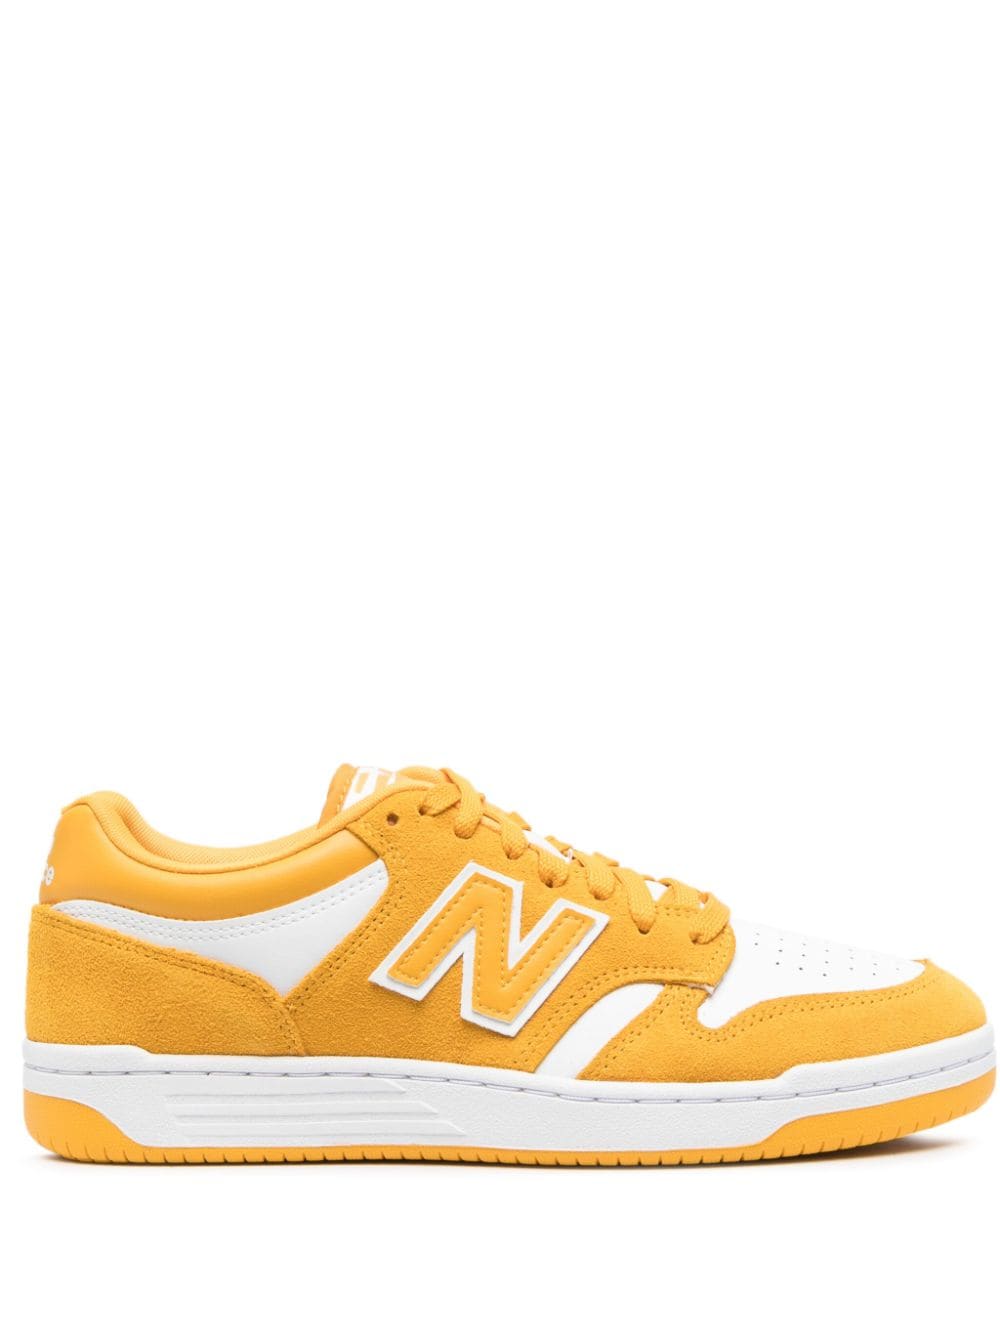 New Balance 480 suede low-top sneakers - Yellow